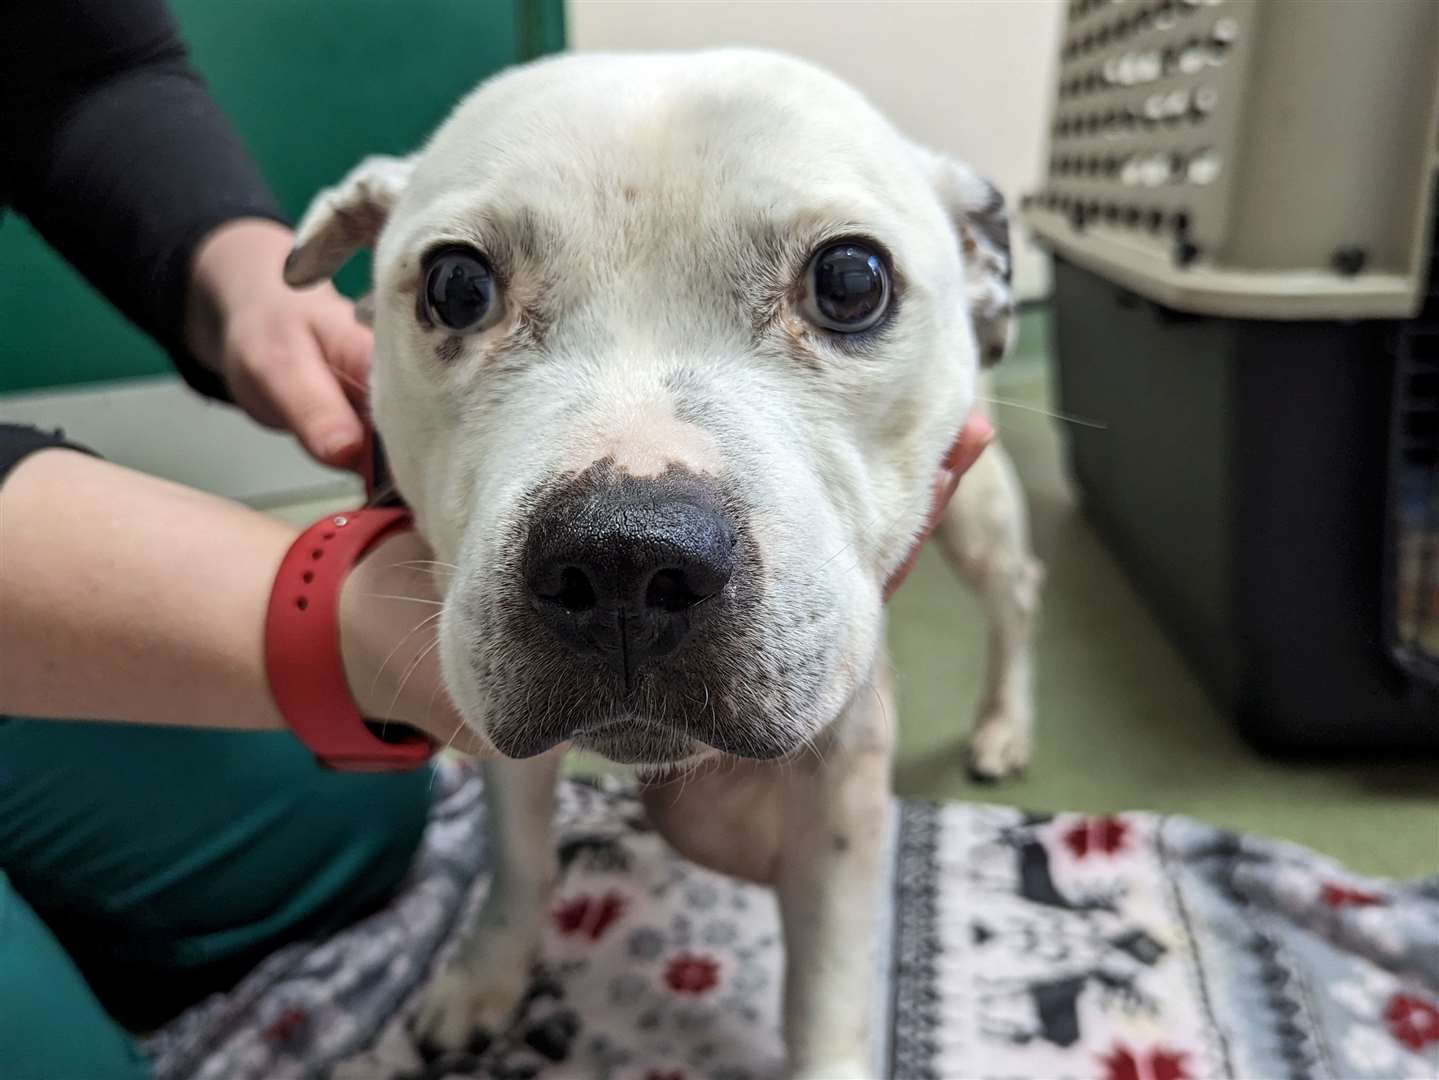 12-year-old Staffordshire bull terrier Cassie had to be put down due to the severity of her injuries